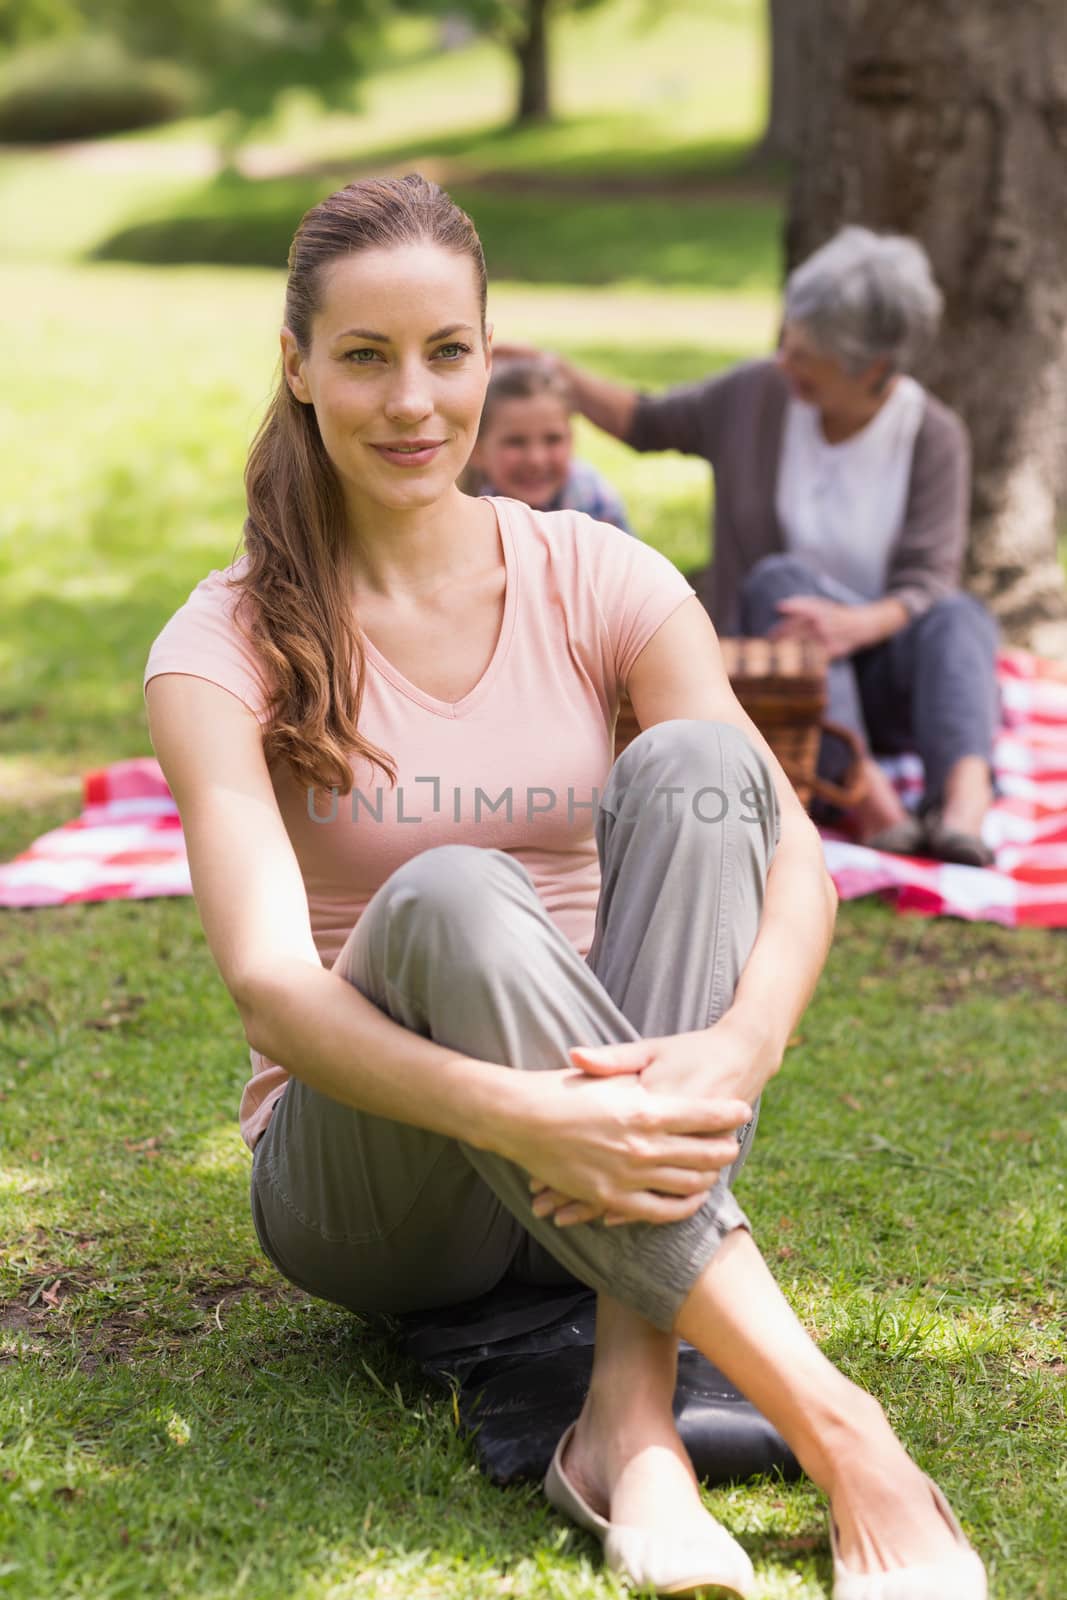 Woman with grandmother and granddaughter in background at park by Wavebreakmedia